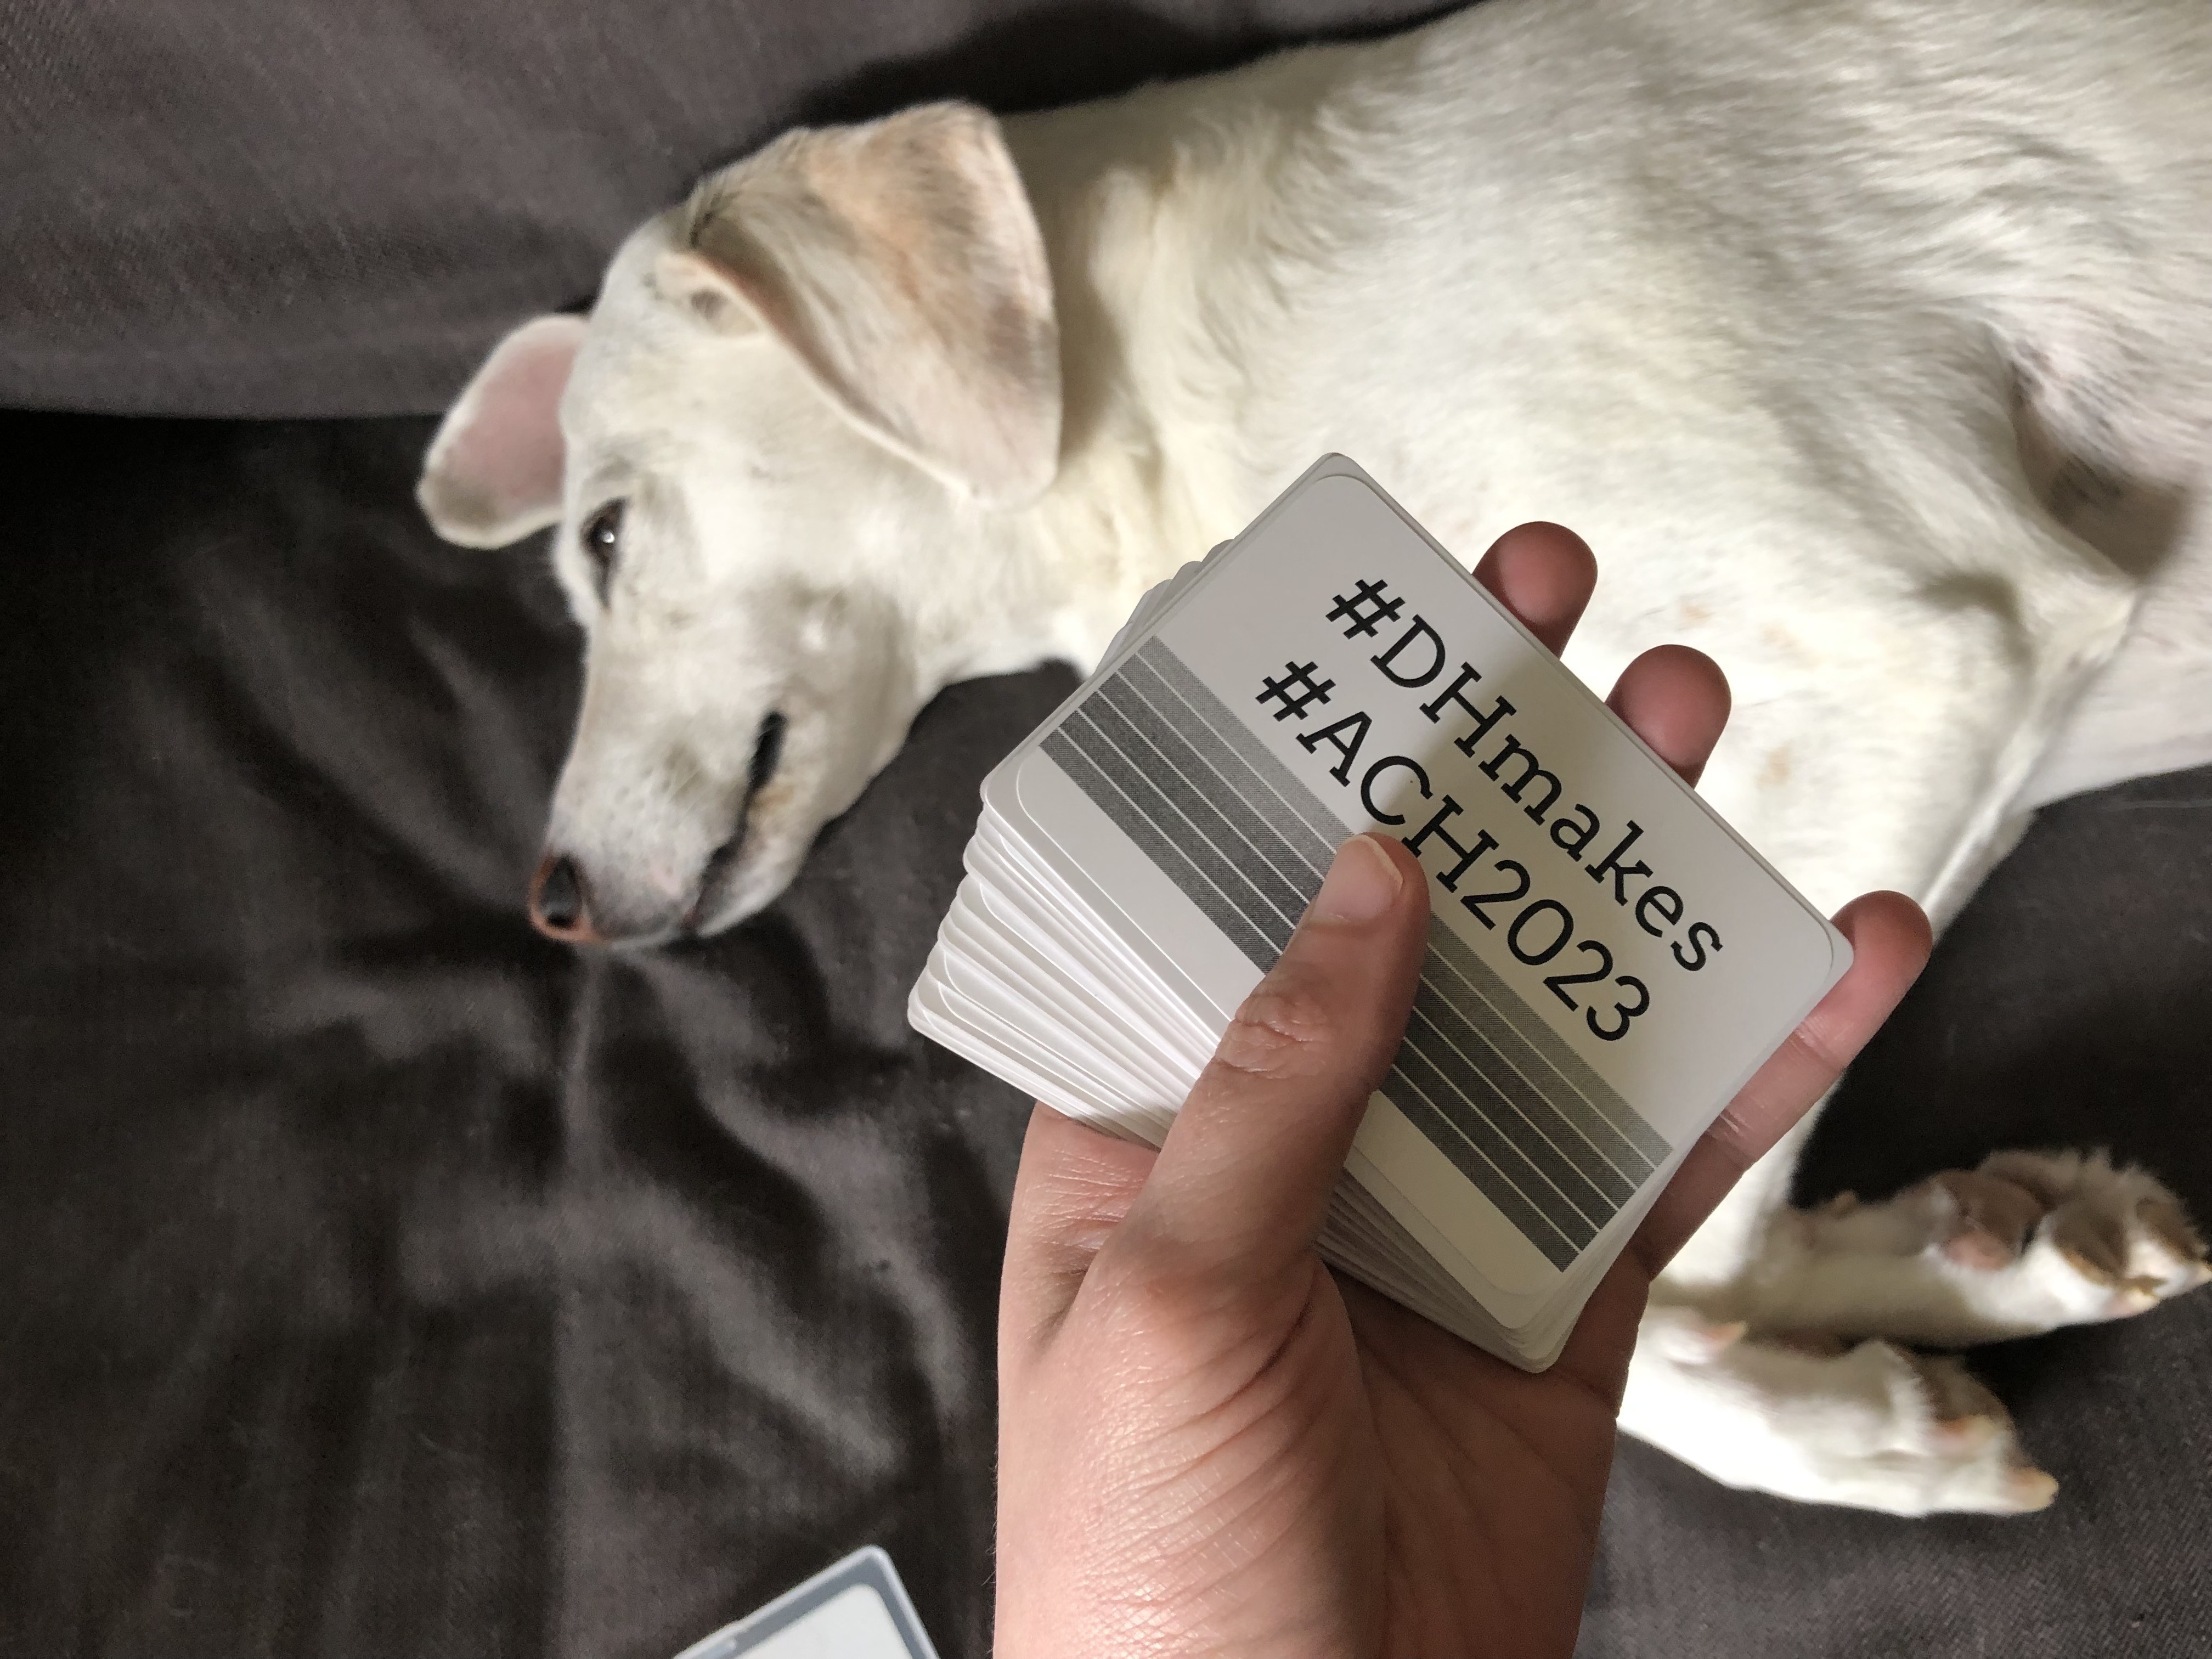 Photo of a hand holding a deck of cards slightly fanned out; the top of the top card says "#DHmakes #ACH2023" over a gradient design; there is a white dog slightly out of fous in the background behind the cards, but it is clear that the dog is a good dog